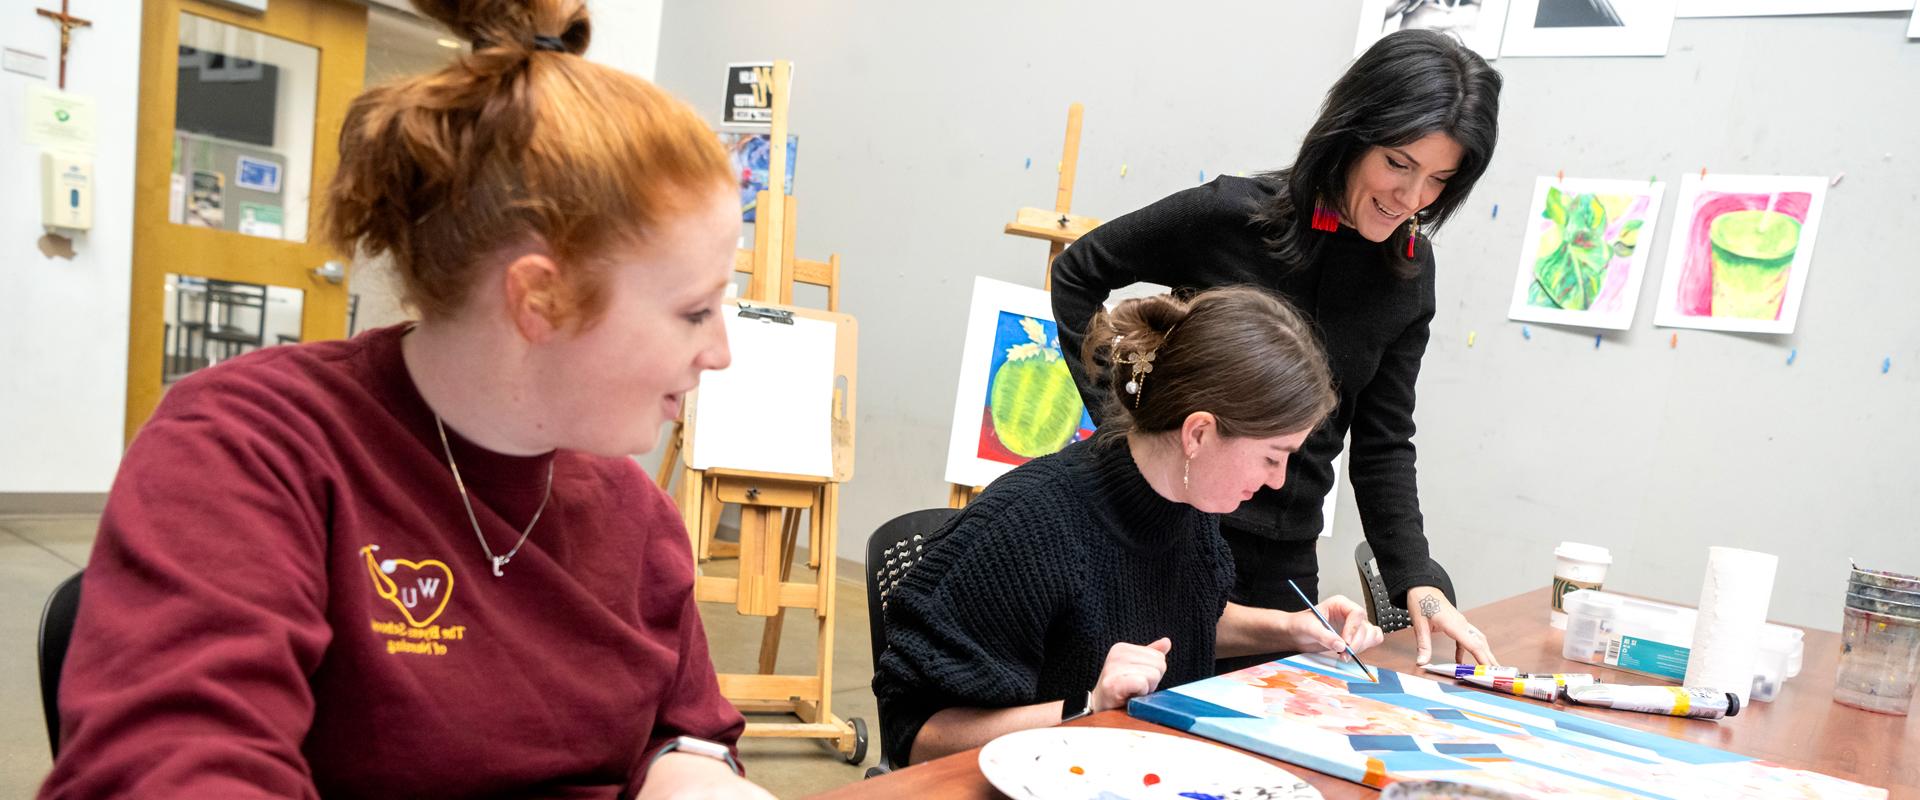 photo of two students in a painting class being observed by the instructor